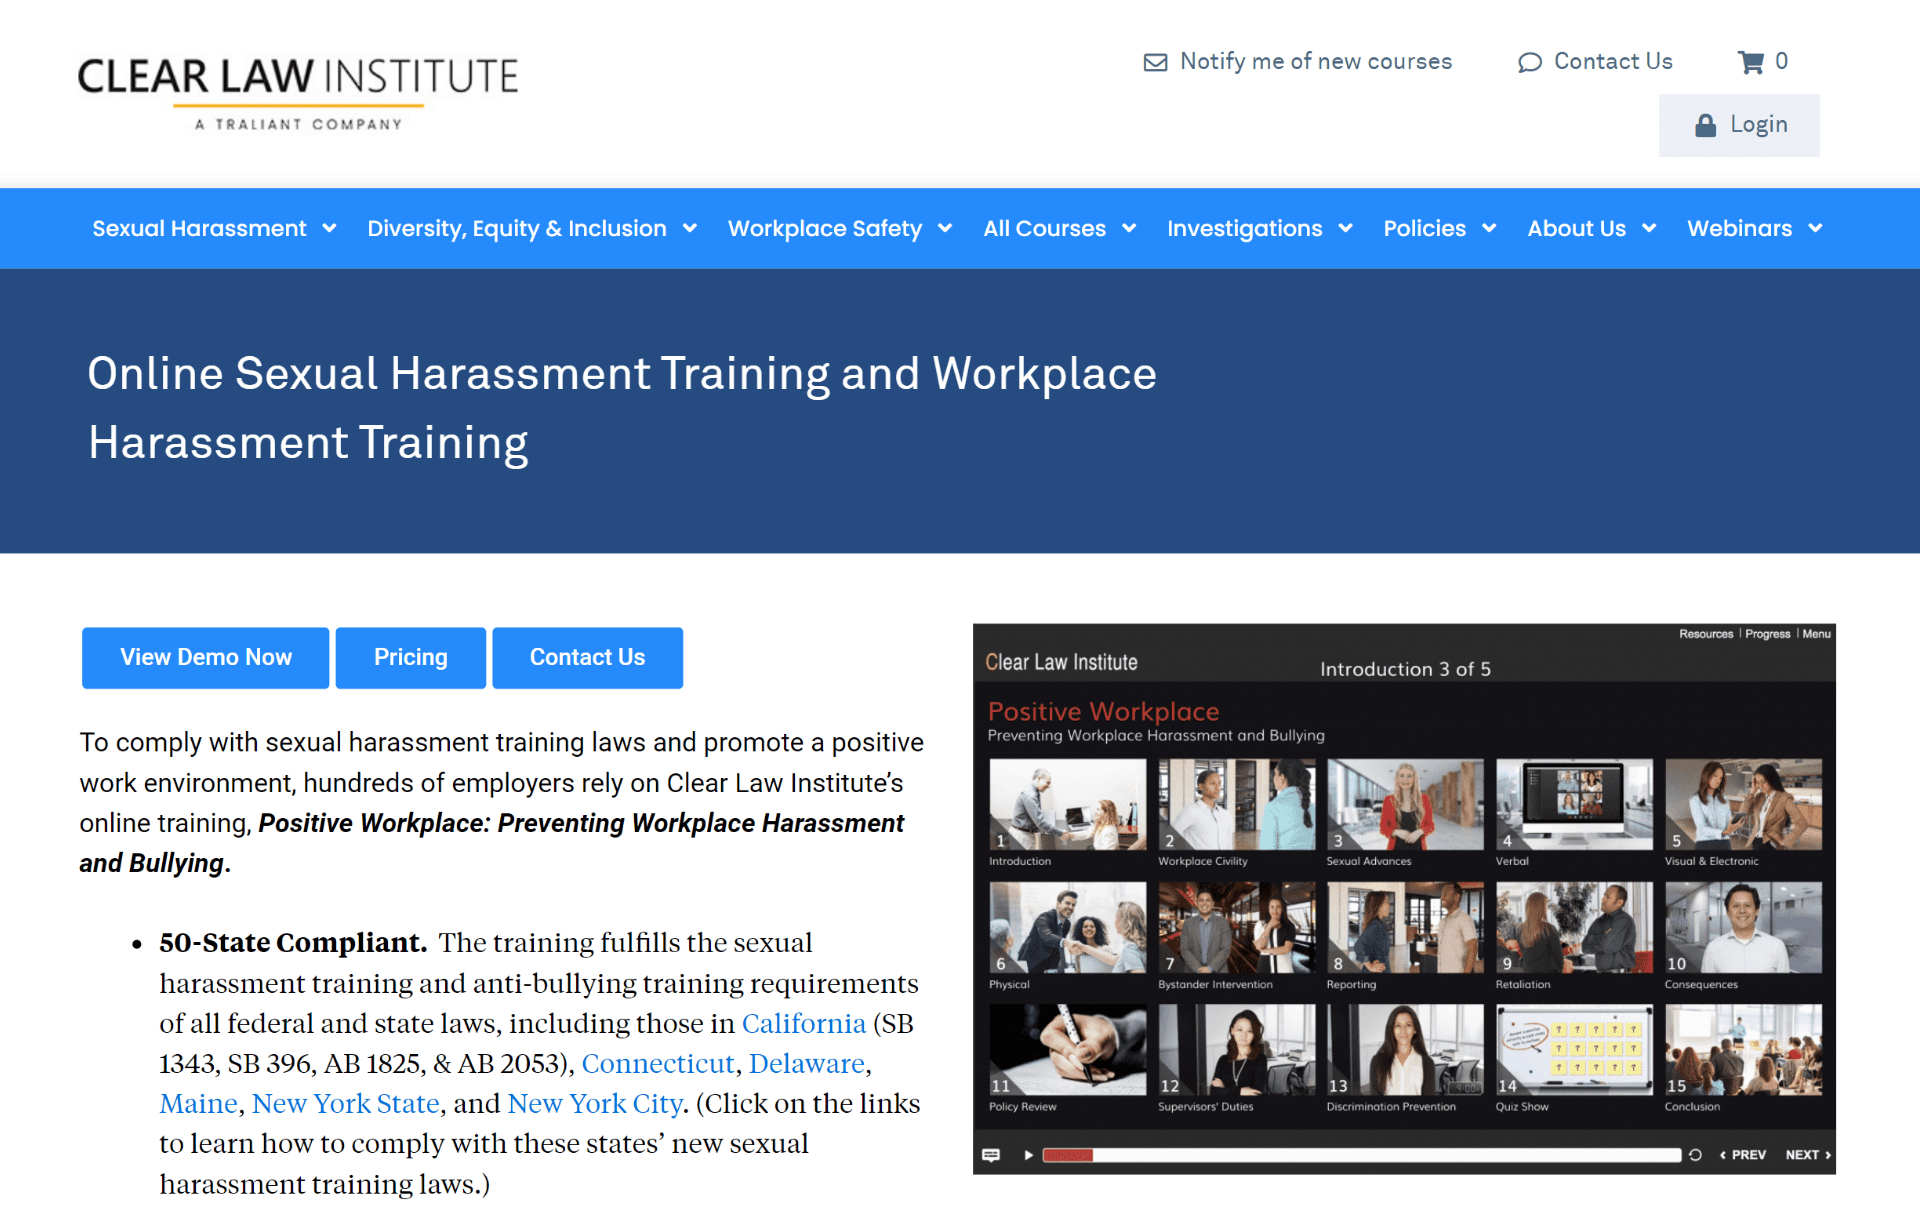 Positive Workplace: Preventing Workplace Harassment and Bullying by Clear Law Institute